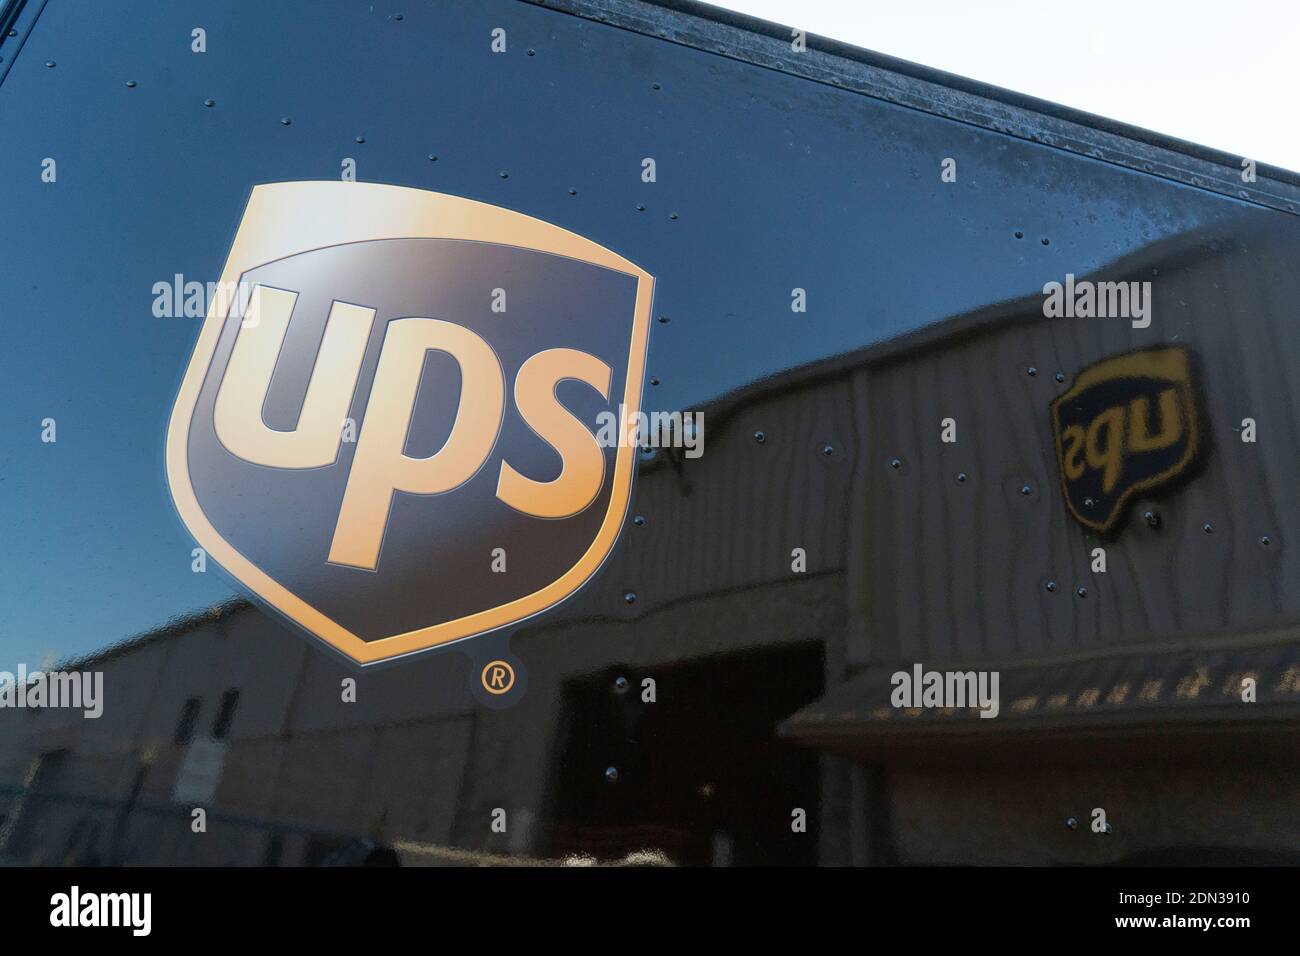 Austin, TX USA December 17, 2020: A UPS truck waits to leave as Texas Governor Greg Abbott (not shown) talks at a UPS facility about Texas' receiving its first shipments of the Pfizer anti-coronavirus vaccine on Thursday, December 17, 2020. Thousands of Texans are expected to be vaccinated over the coming days. Credit: Bob Daemmrich/Alamy Live News Stock Photo